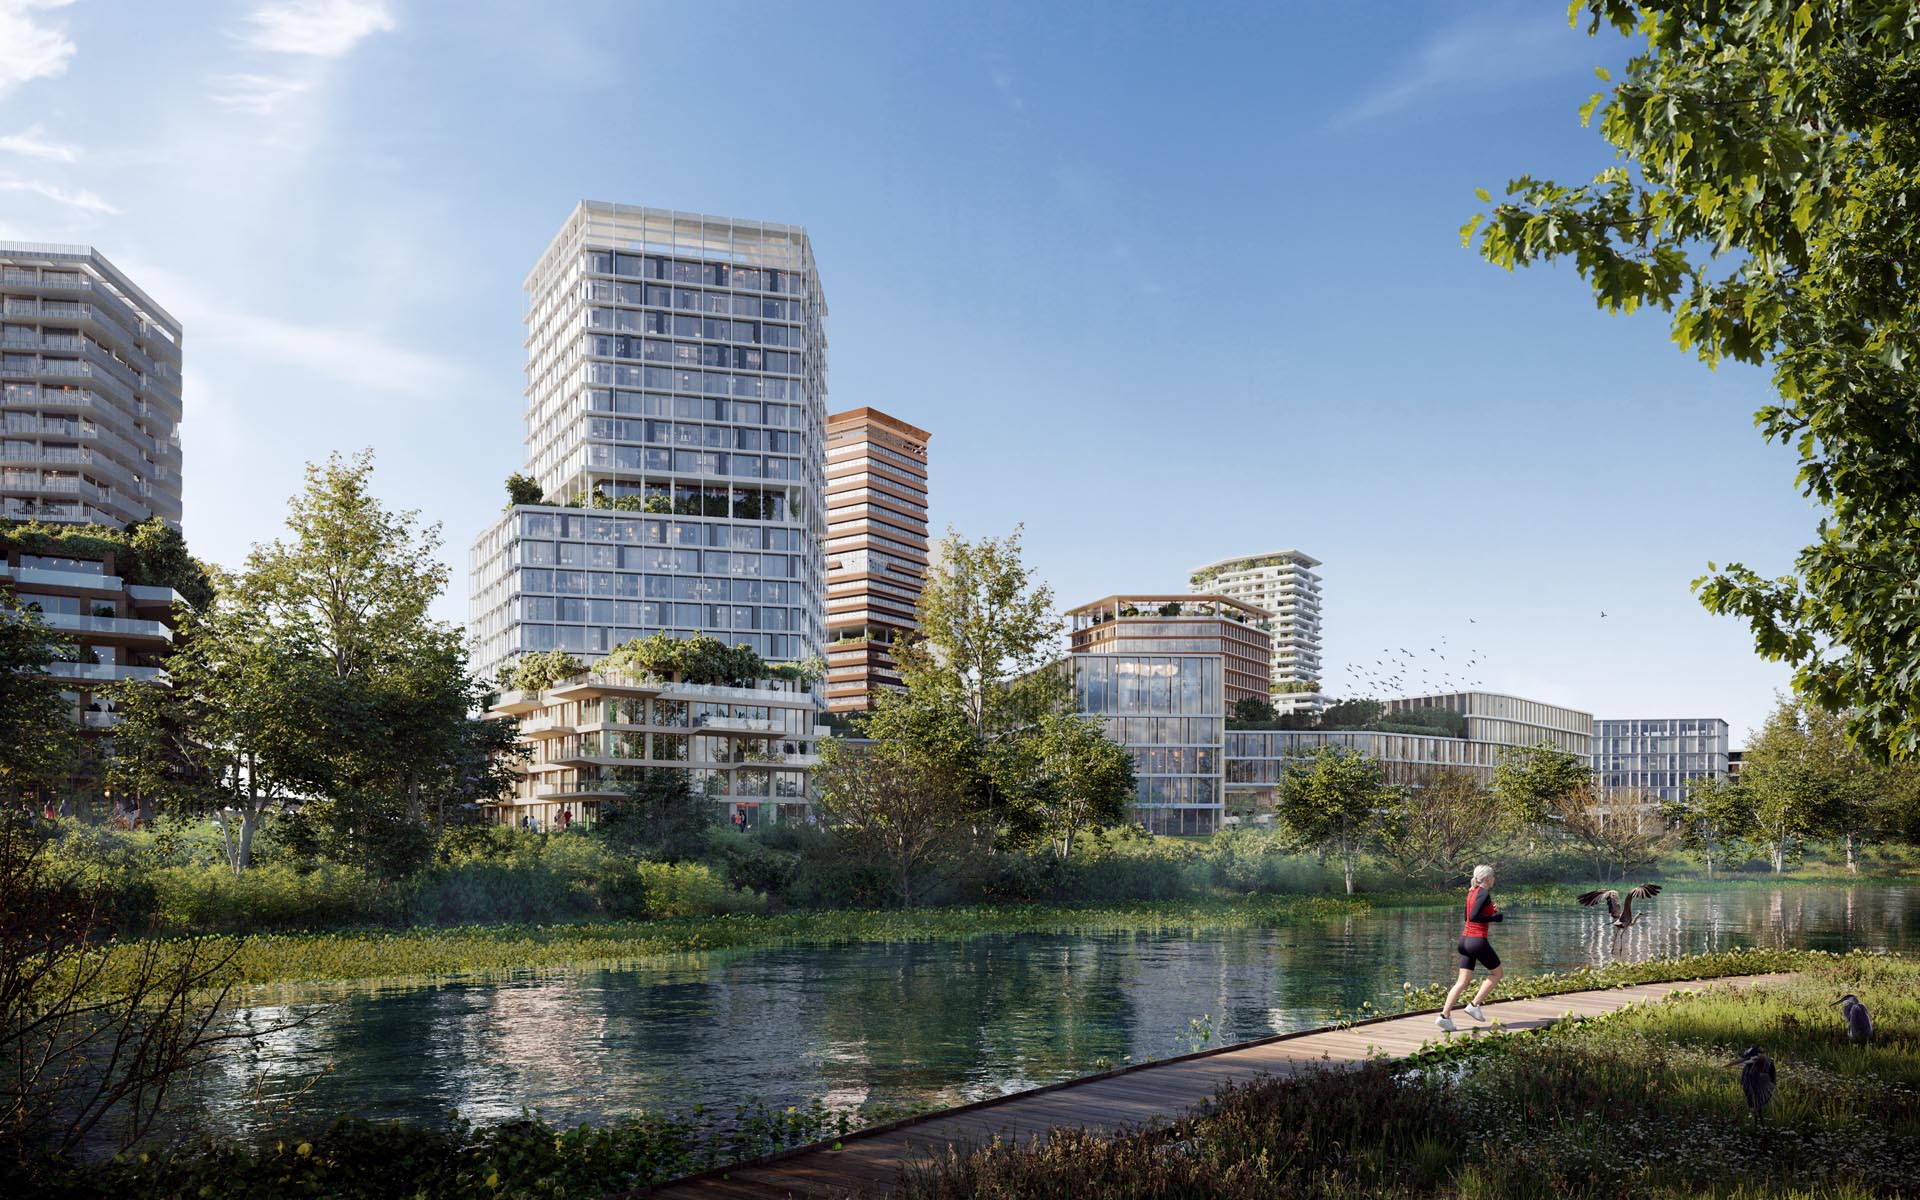 ‘Gardens on the Danube’ Project is Awarded Second Place in Competition for Bratislava’s Southbank